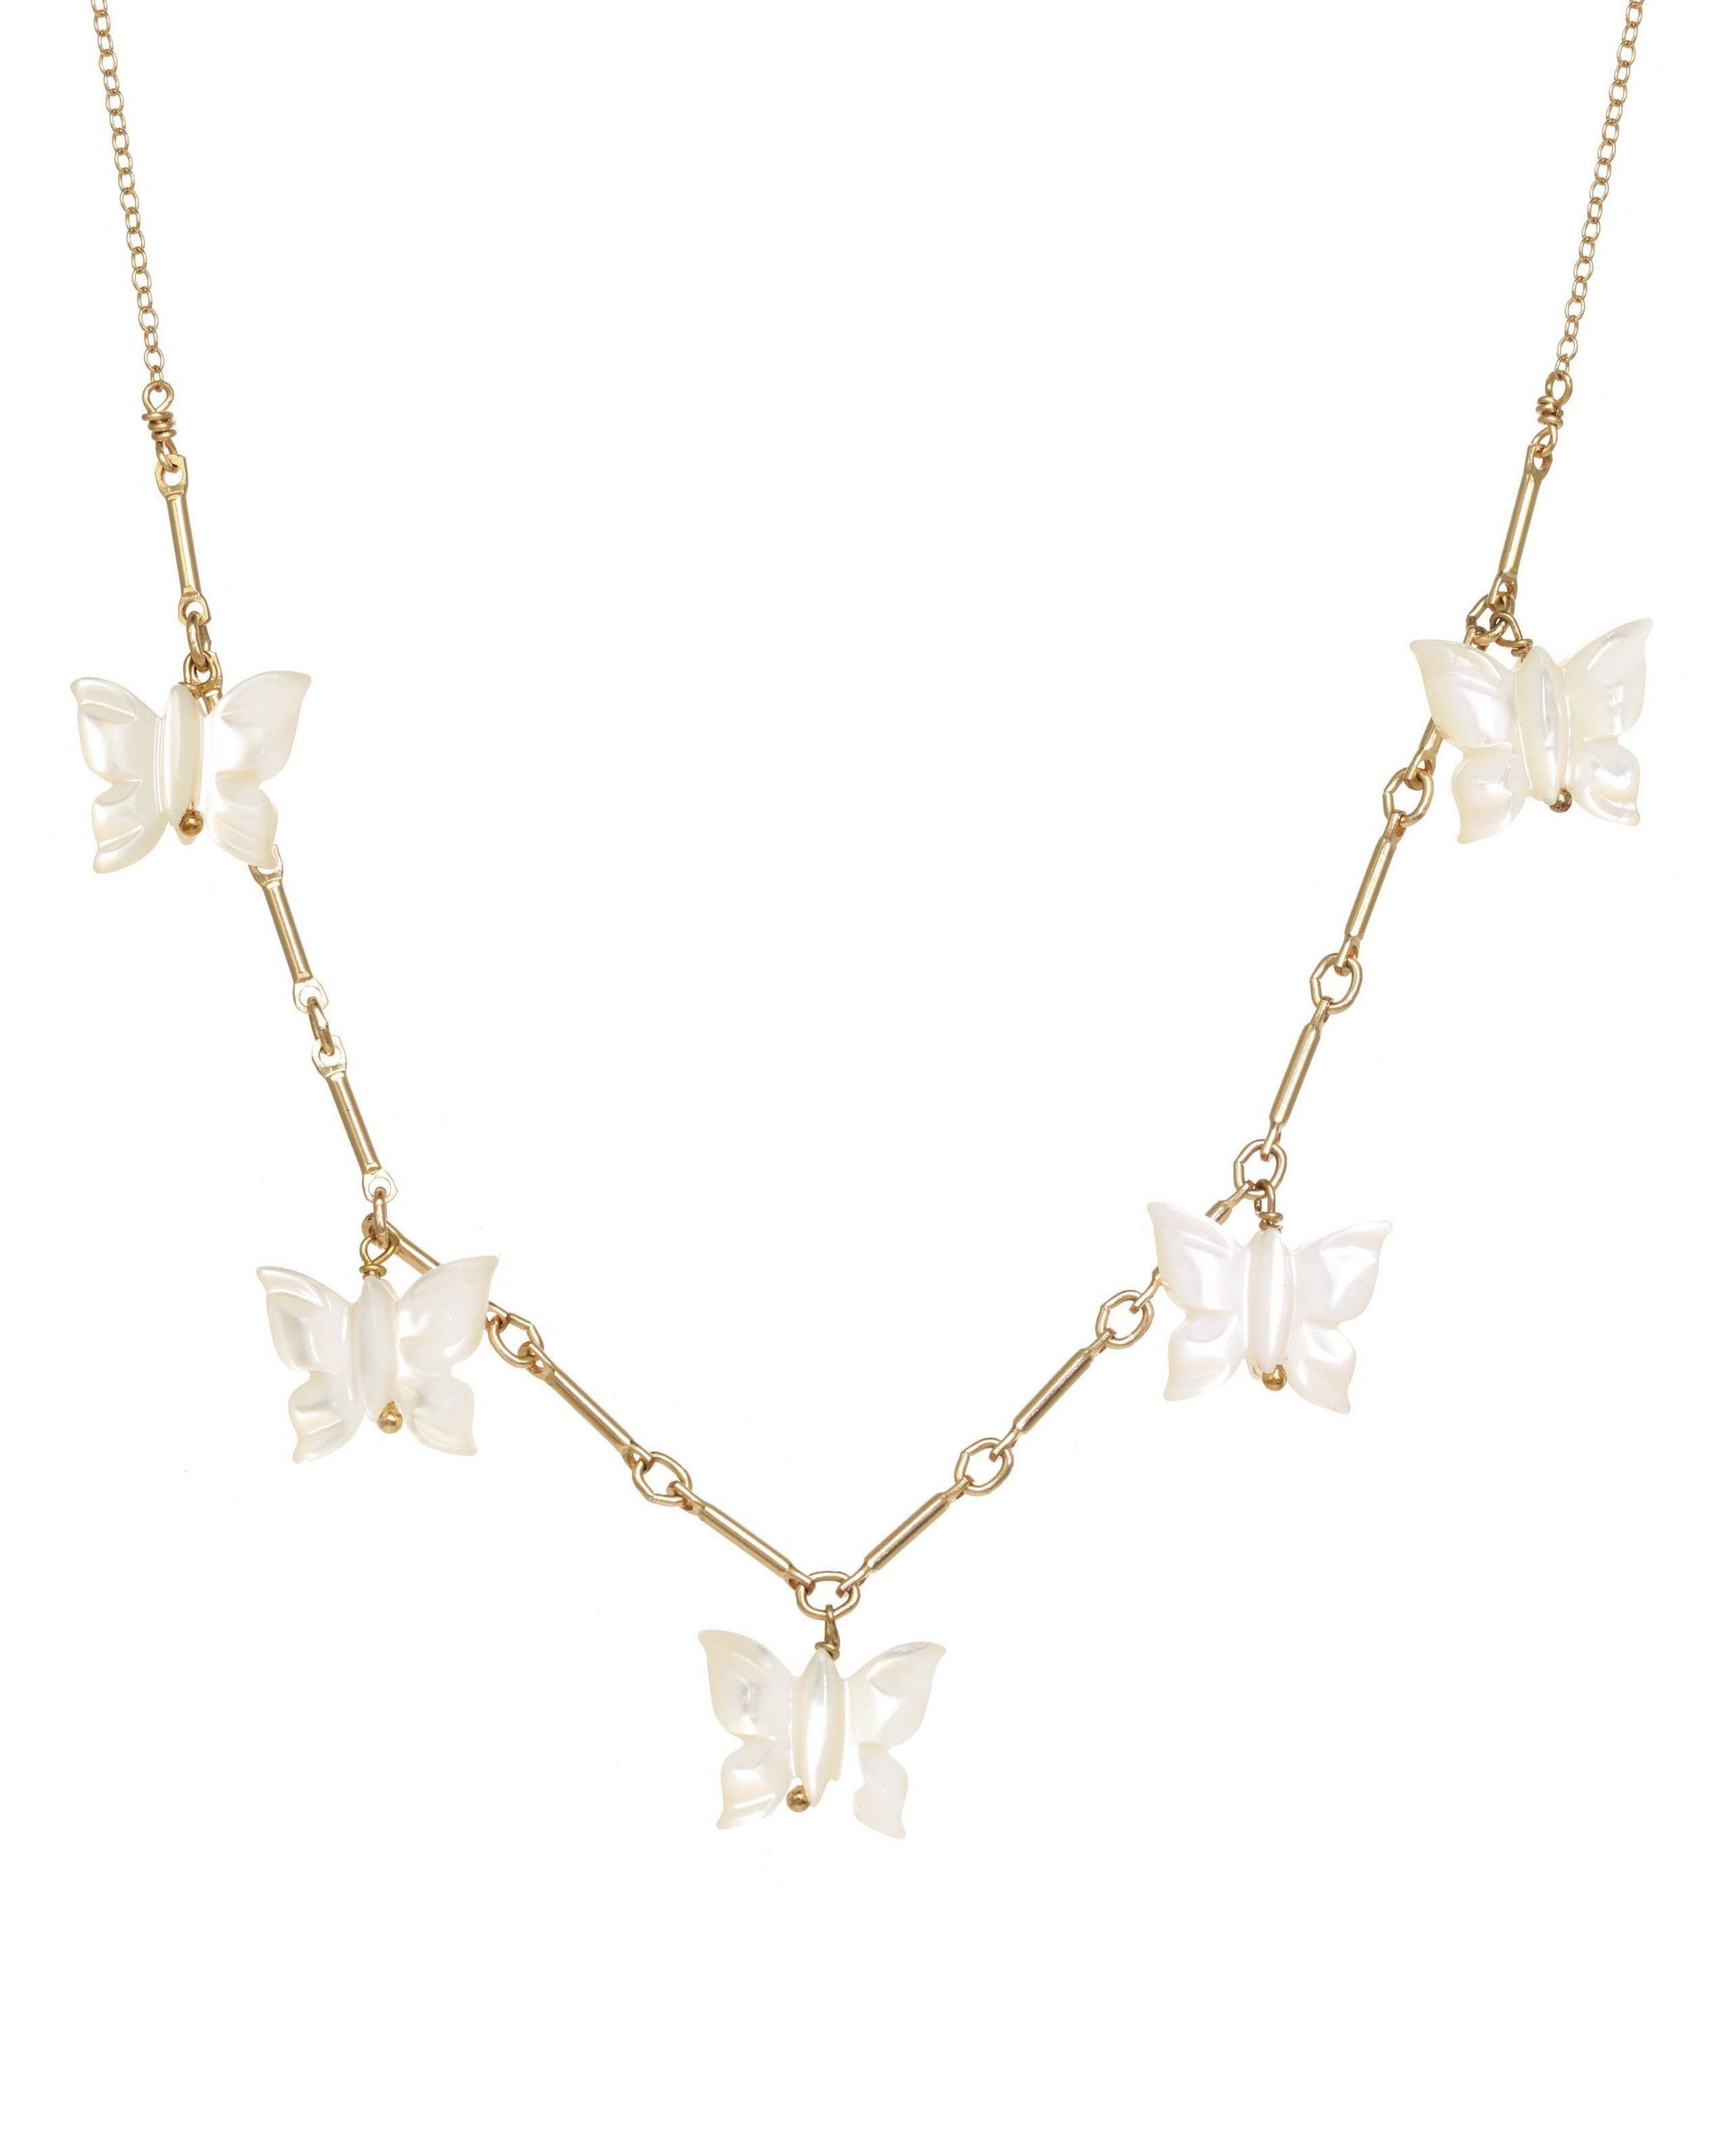 Fallon Necklace by KOZAKH. A 16 to 18 inch adjustable length, bar link chain necklace in 14K Gold Filled, featuring hand-carved Mother of Pearl butterfly charms. 